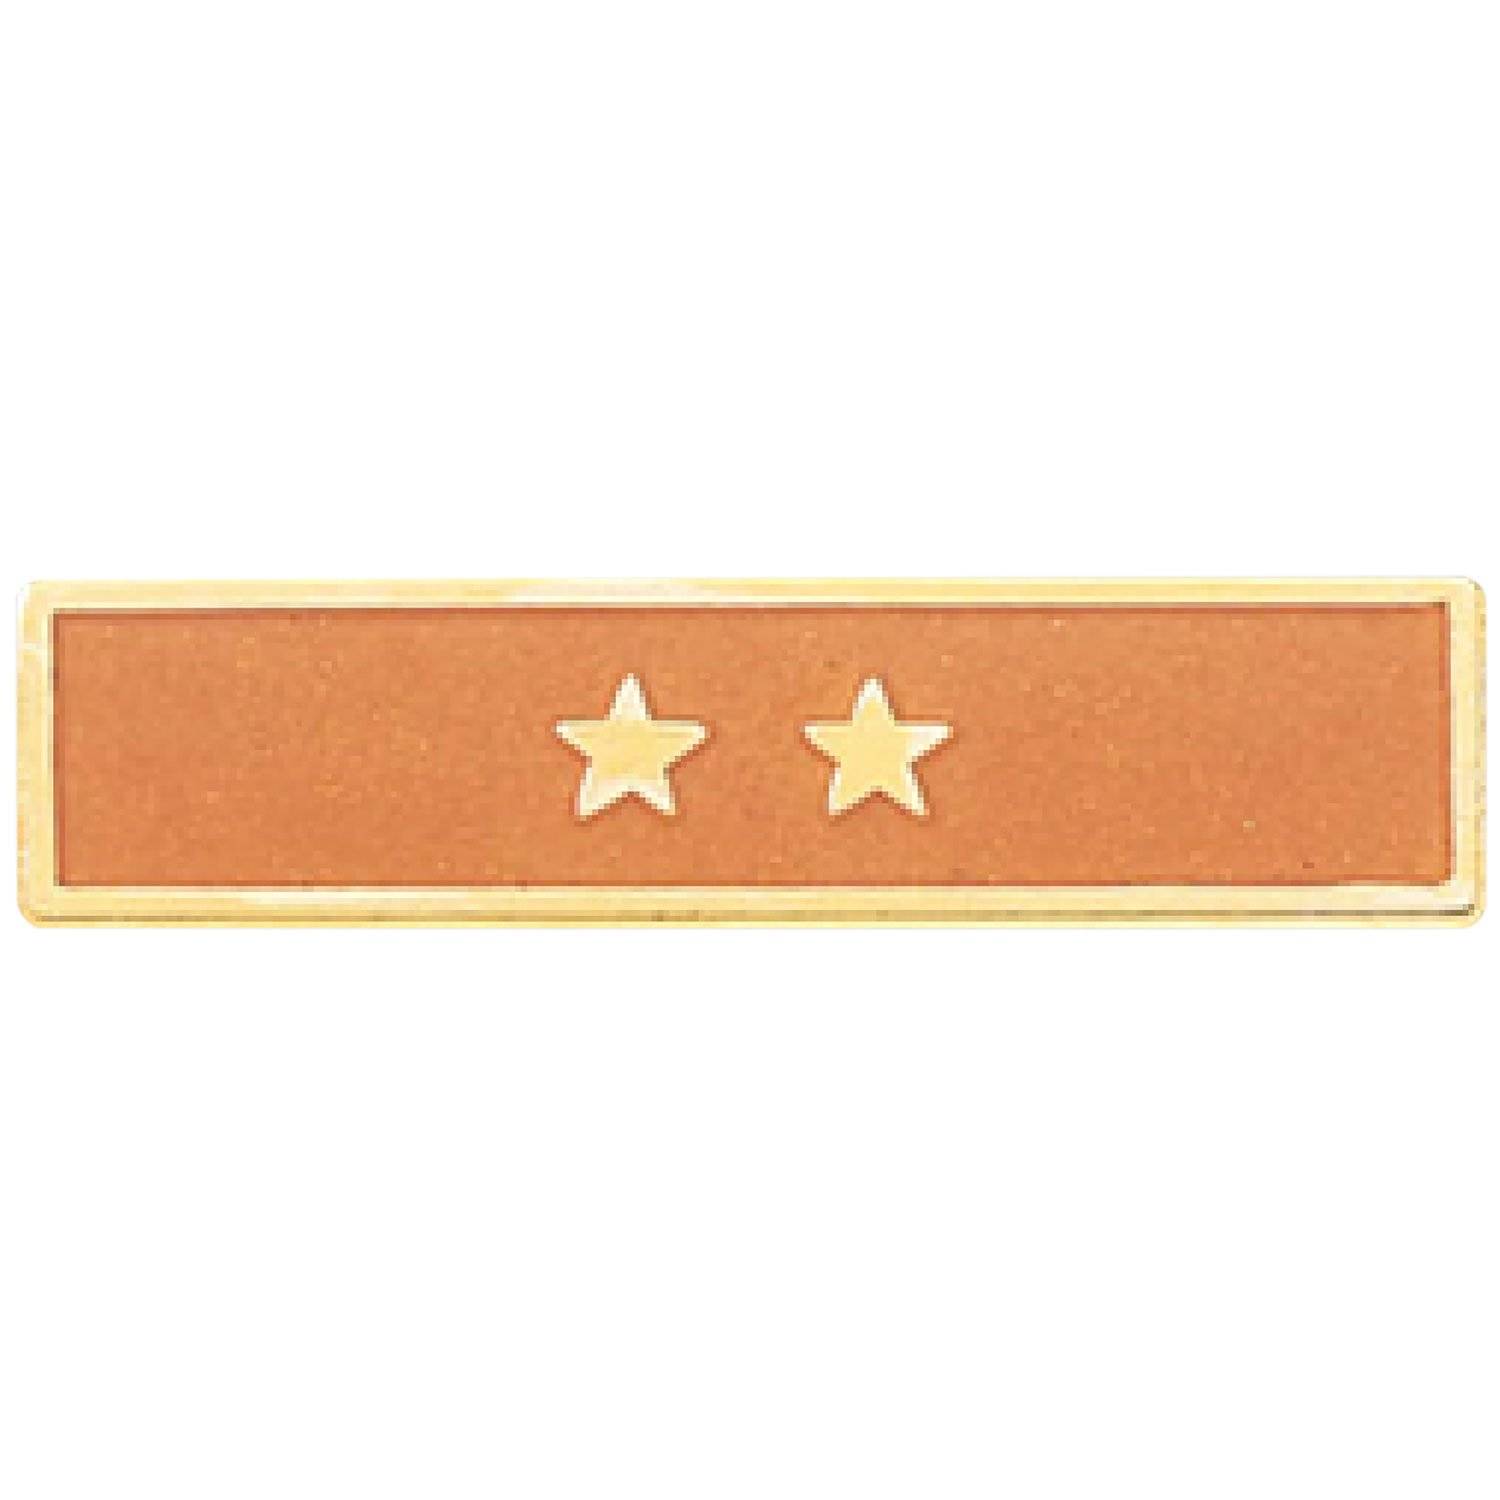 Two Star Commendation Bar